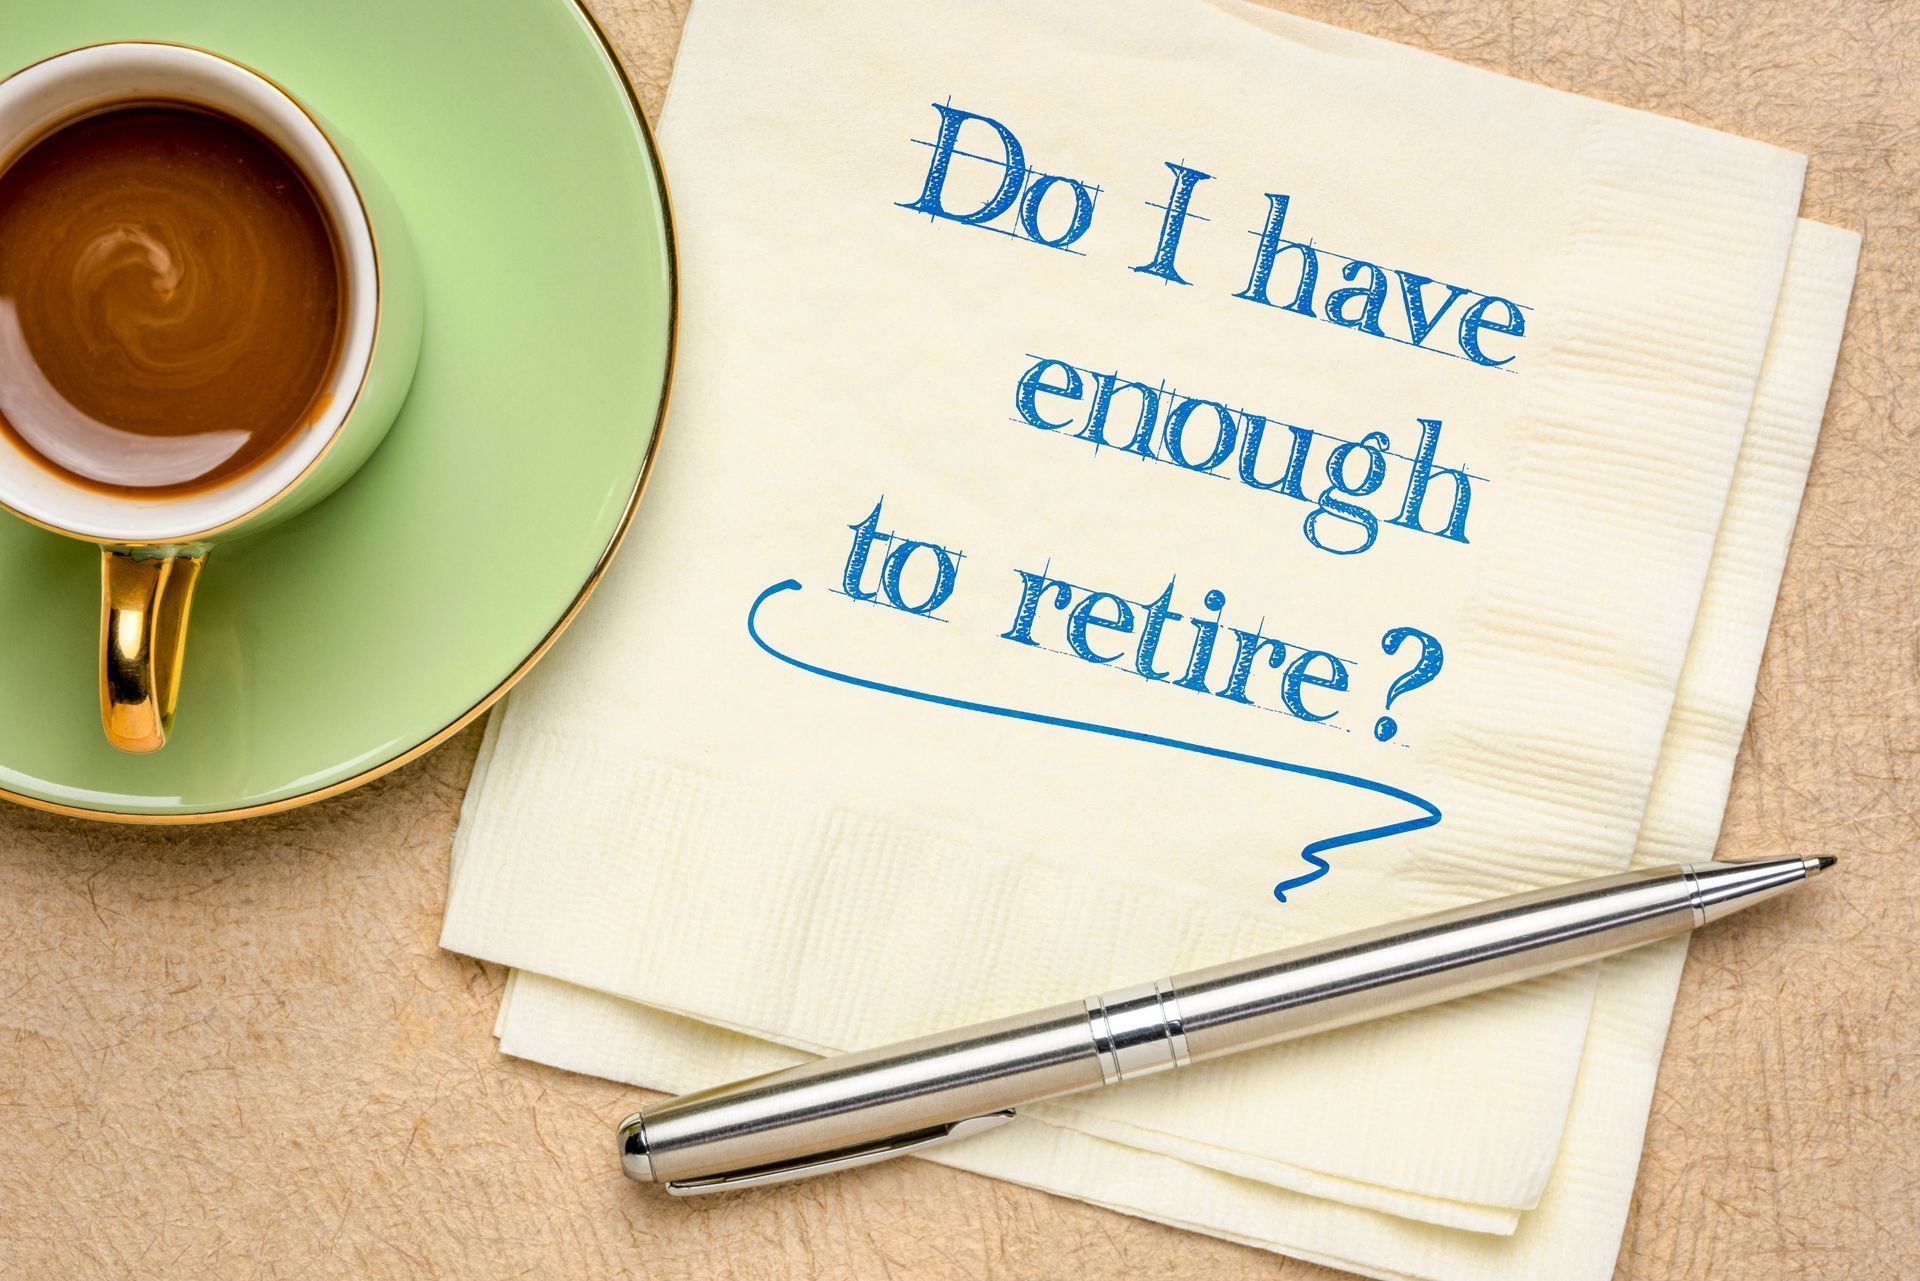 Do I have enough to retire? graphic